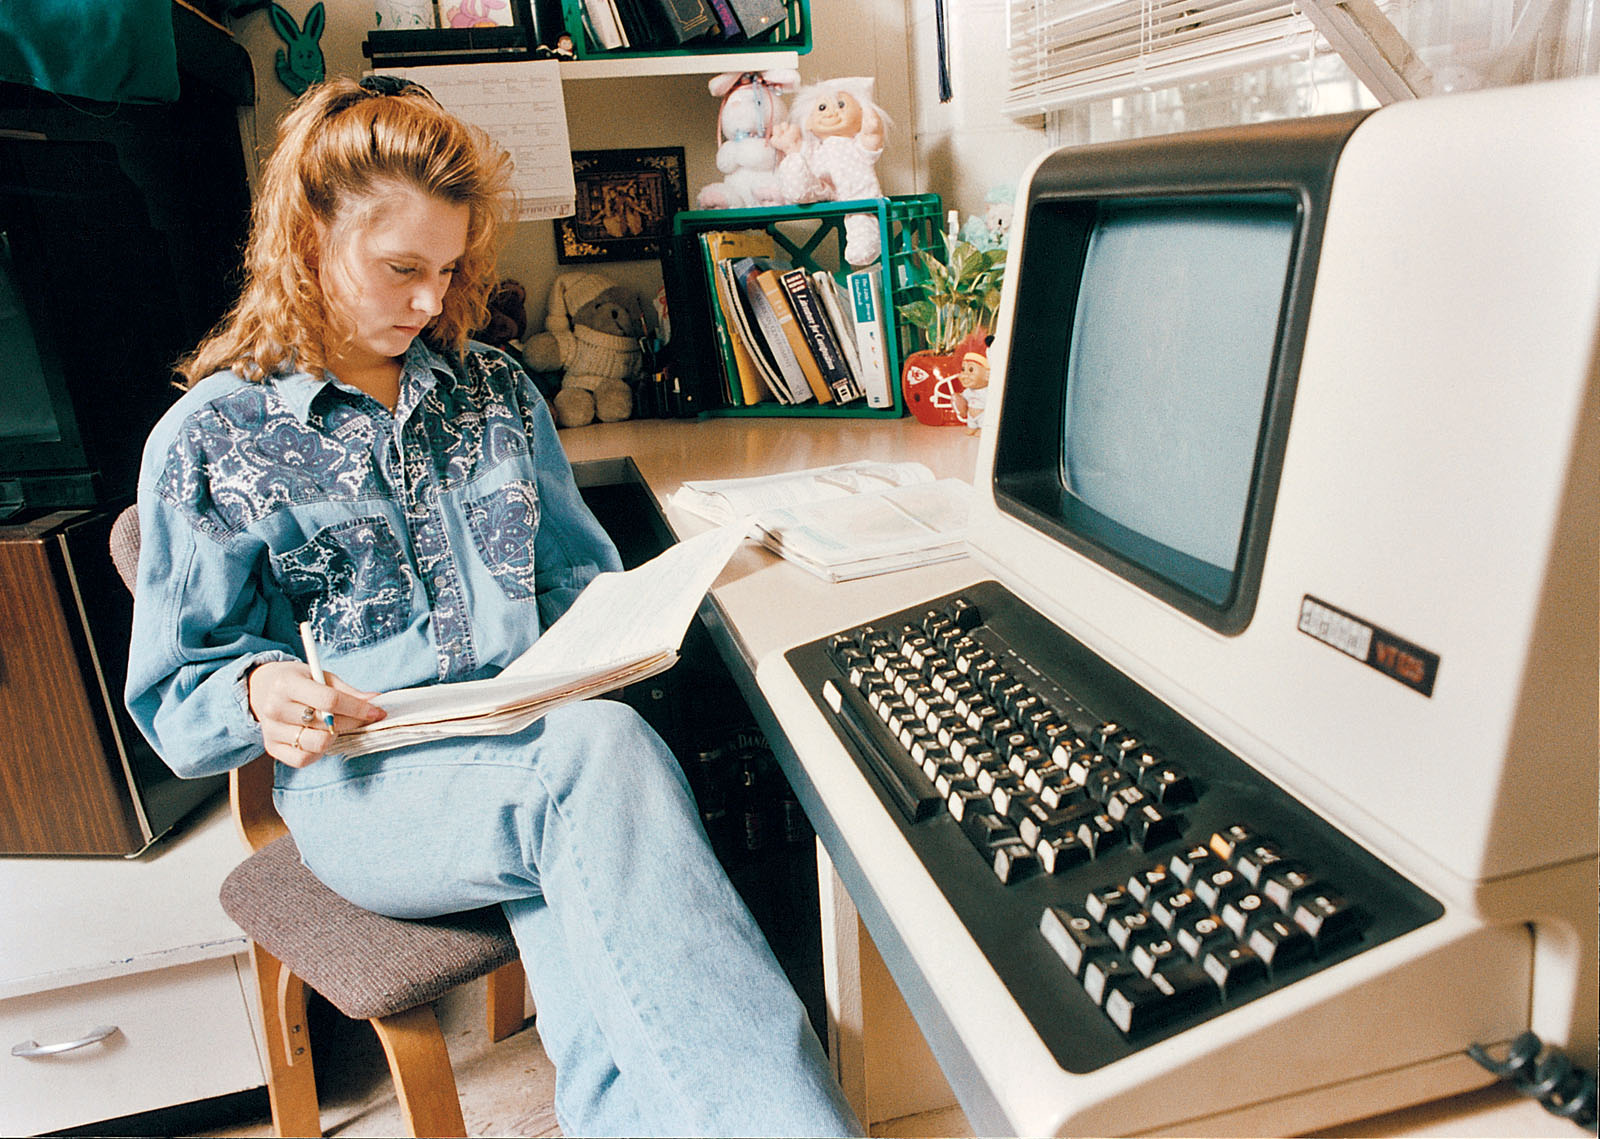 Beginning in 1987, every Northwest residence hall room was equipped with a computer terminal networked to a common server that provided access to an online library catalog, word processing and email.